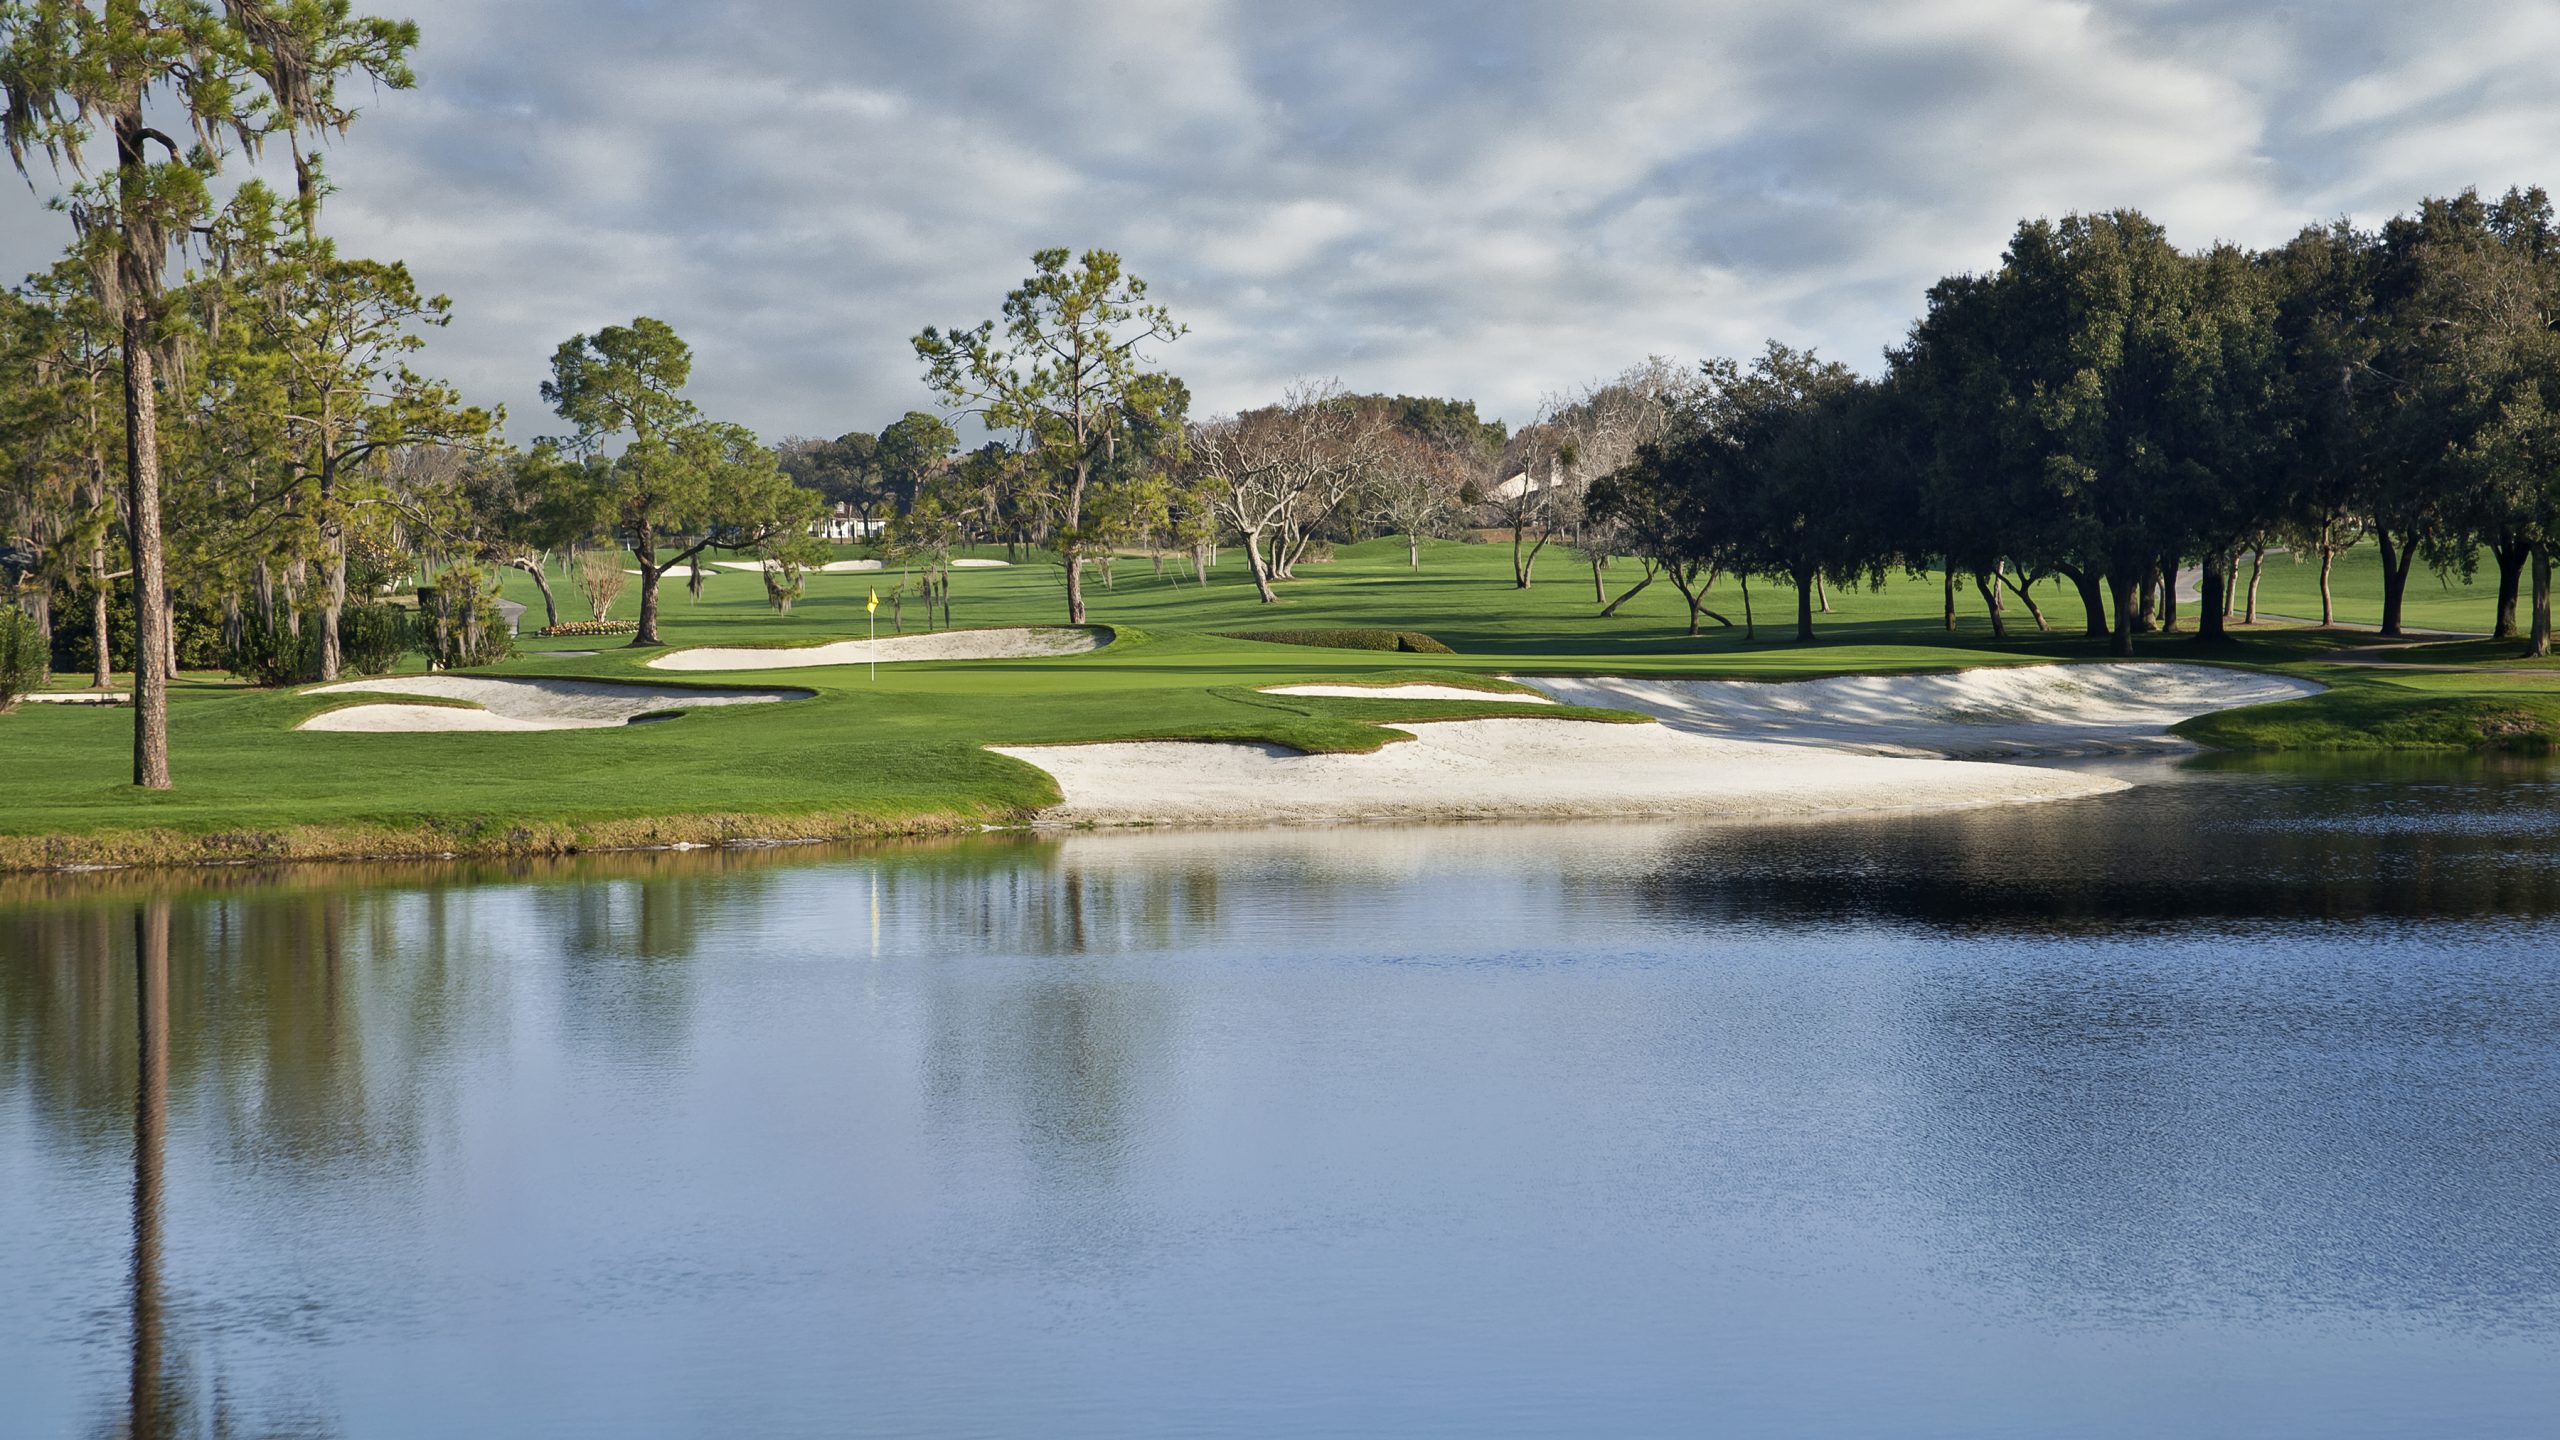 Large lake surrounding the golf course at Bay Hill